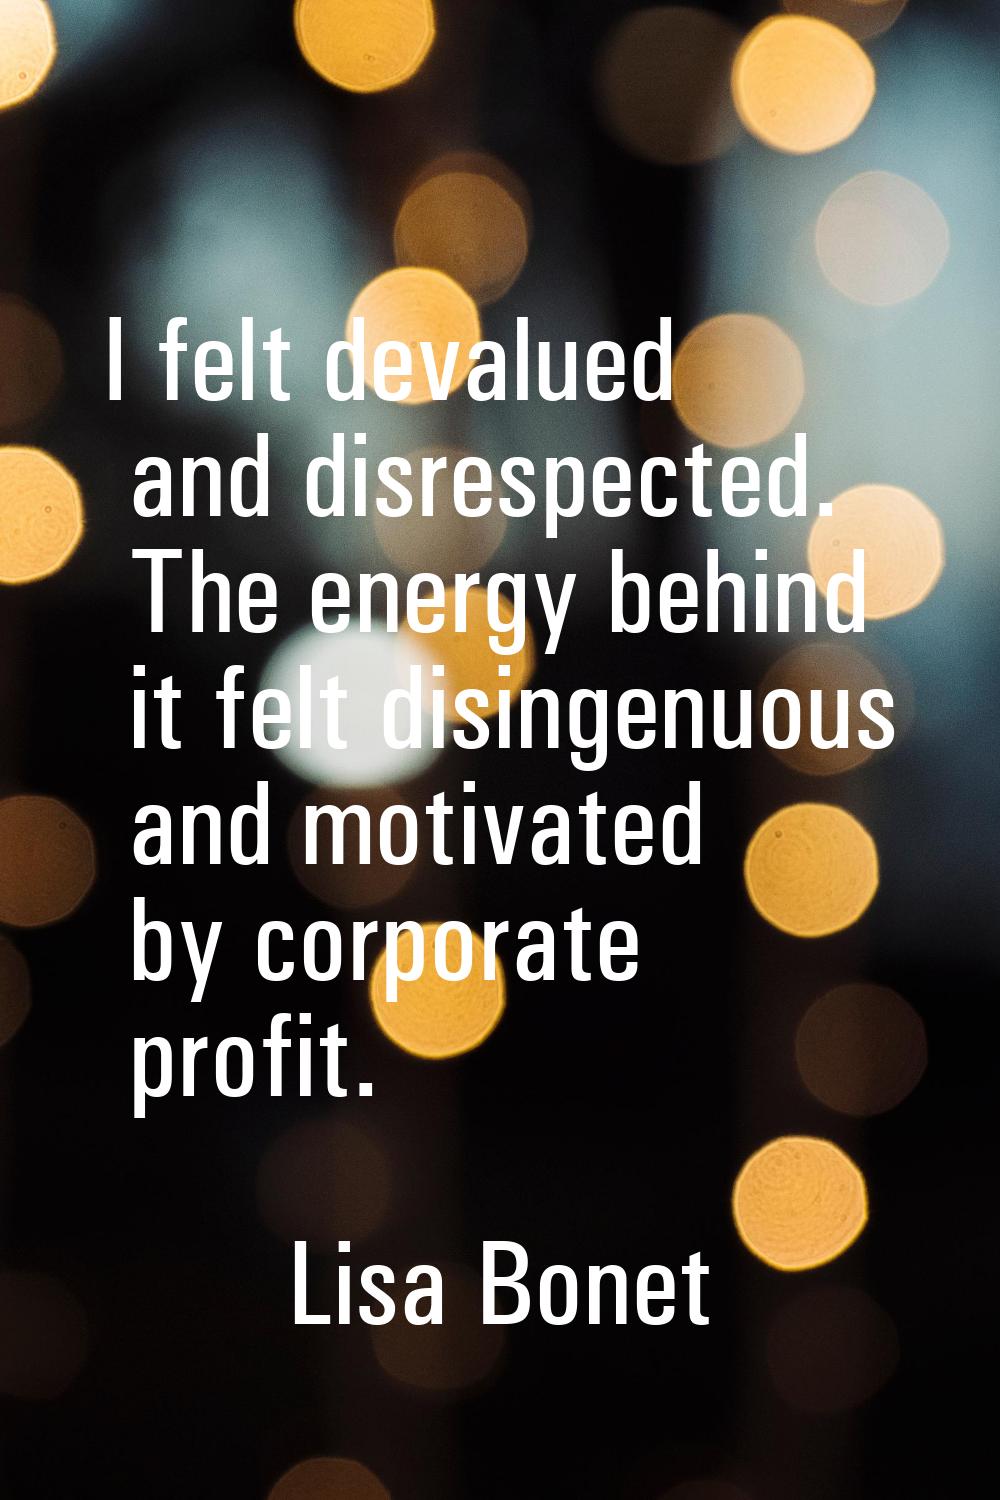 I felt devalued and disrespected. The energy behind it felt disingenuous and motivated by corporate